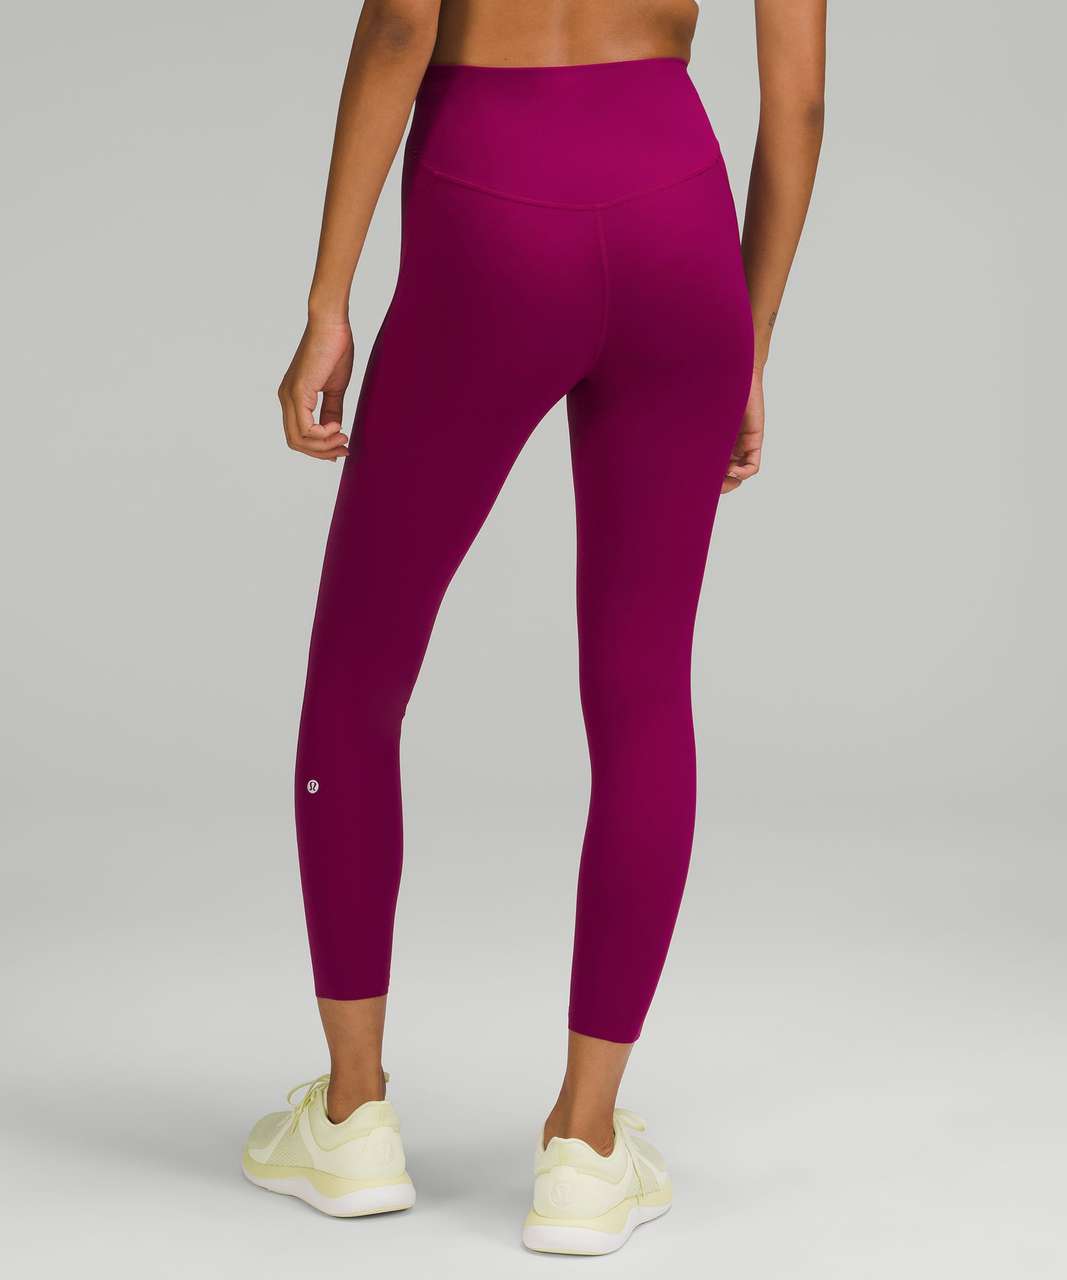 Lululemon athletica Base Pace High-Rise Tight 25